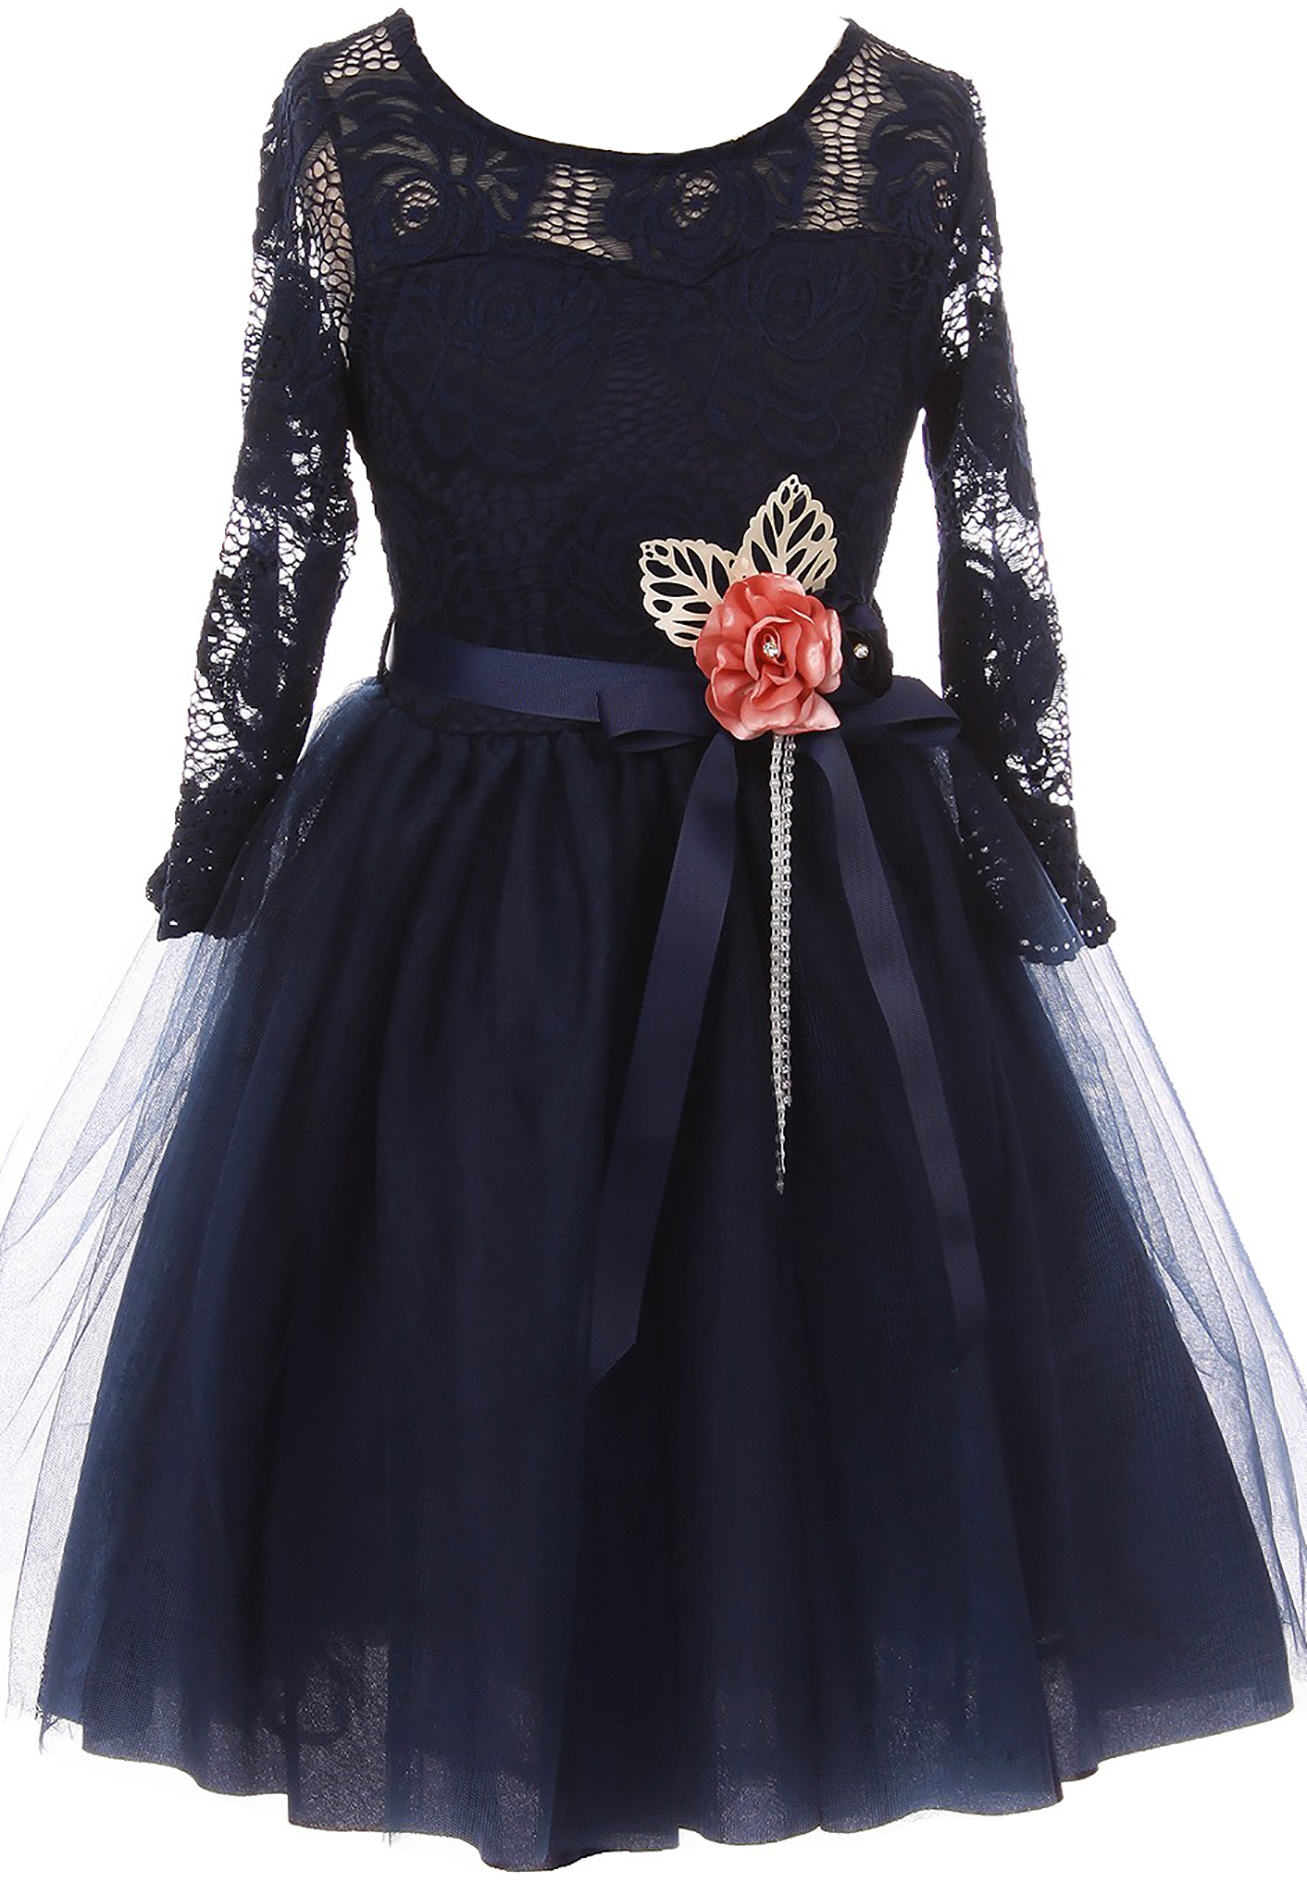 Little Girl Floral Lace Top Tulle Flower Party Flower Girl Dress USA Navy 4 JKS 2098 - image 1 of 3